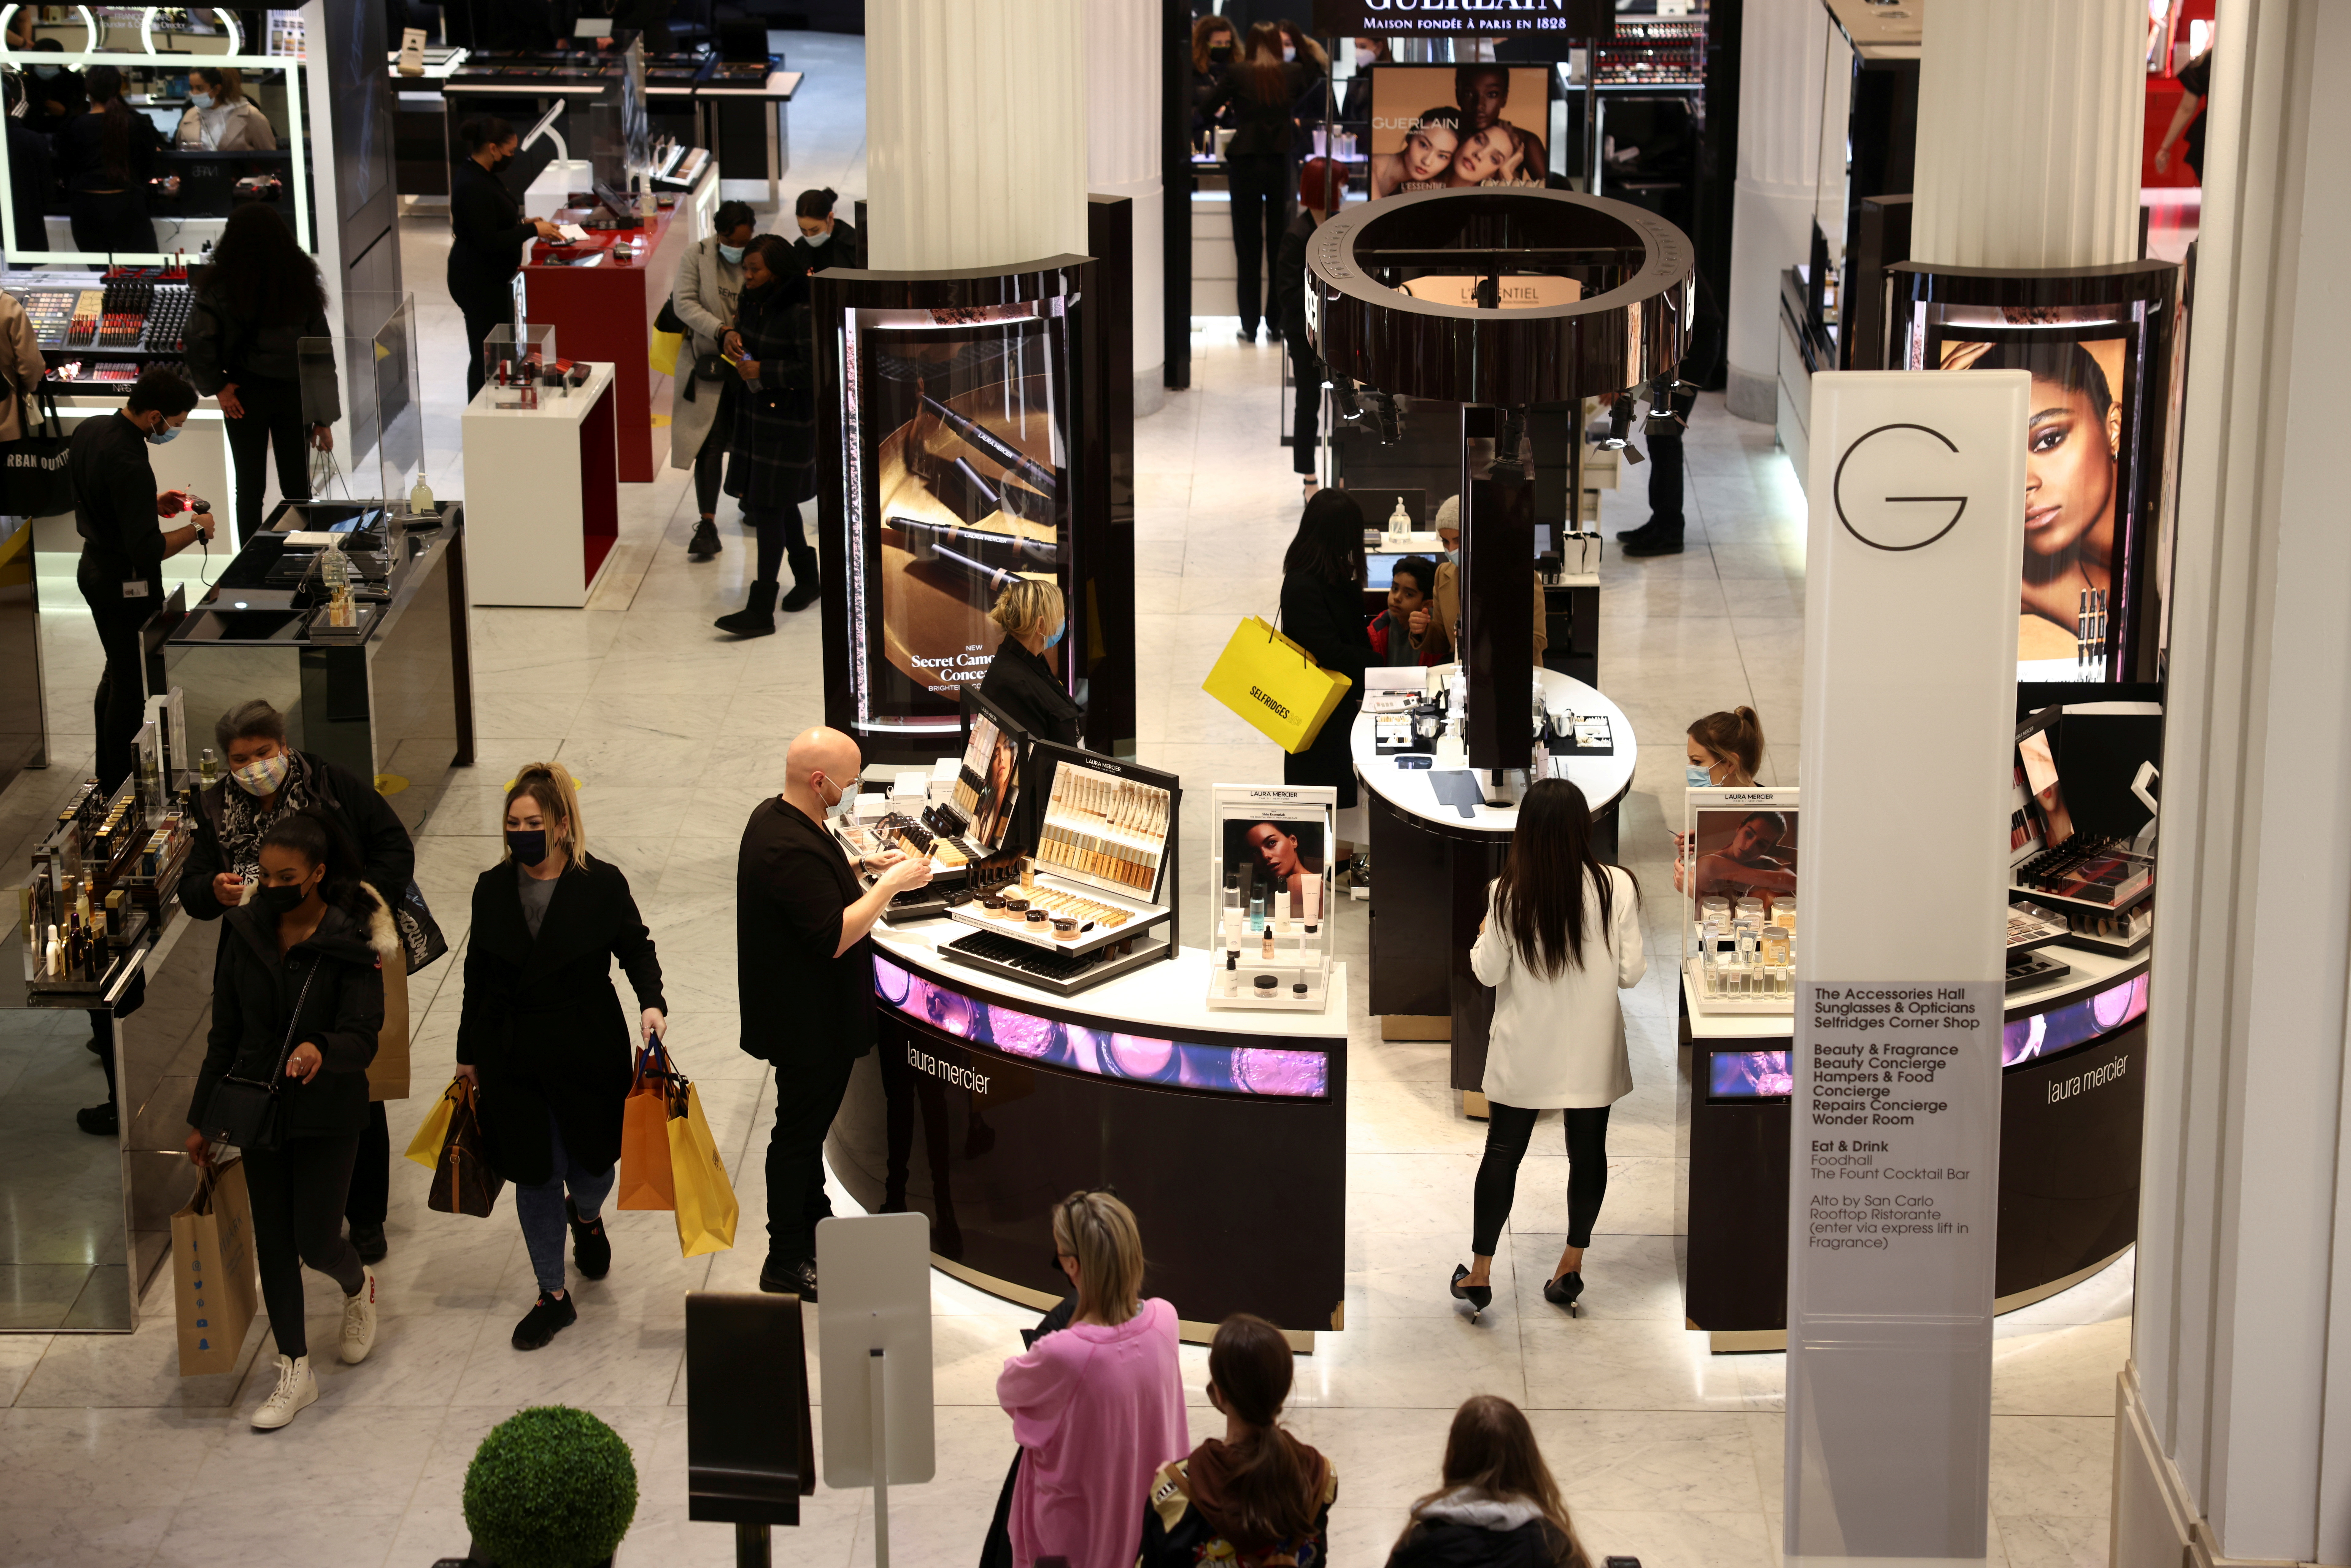 People shop in the Selfridges department store on Oxford street in London